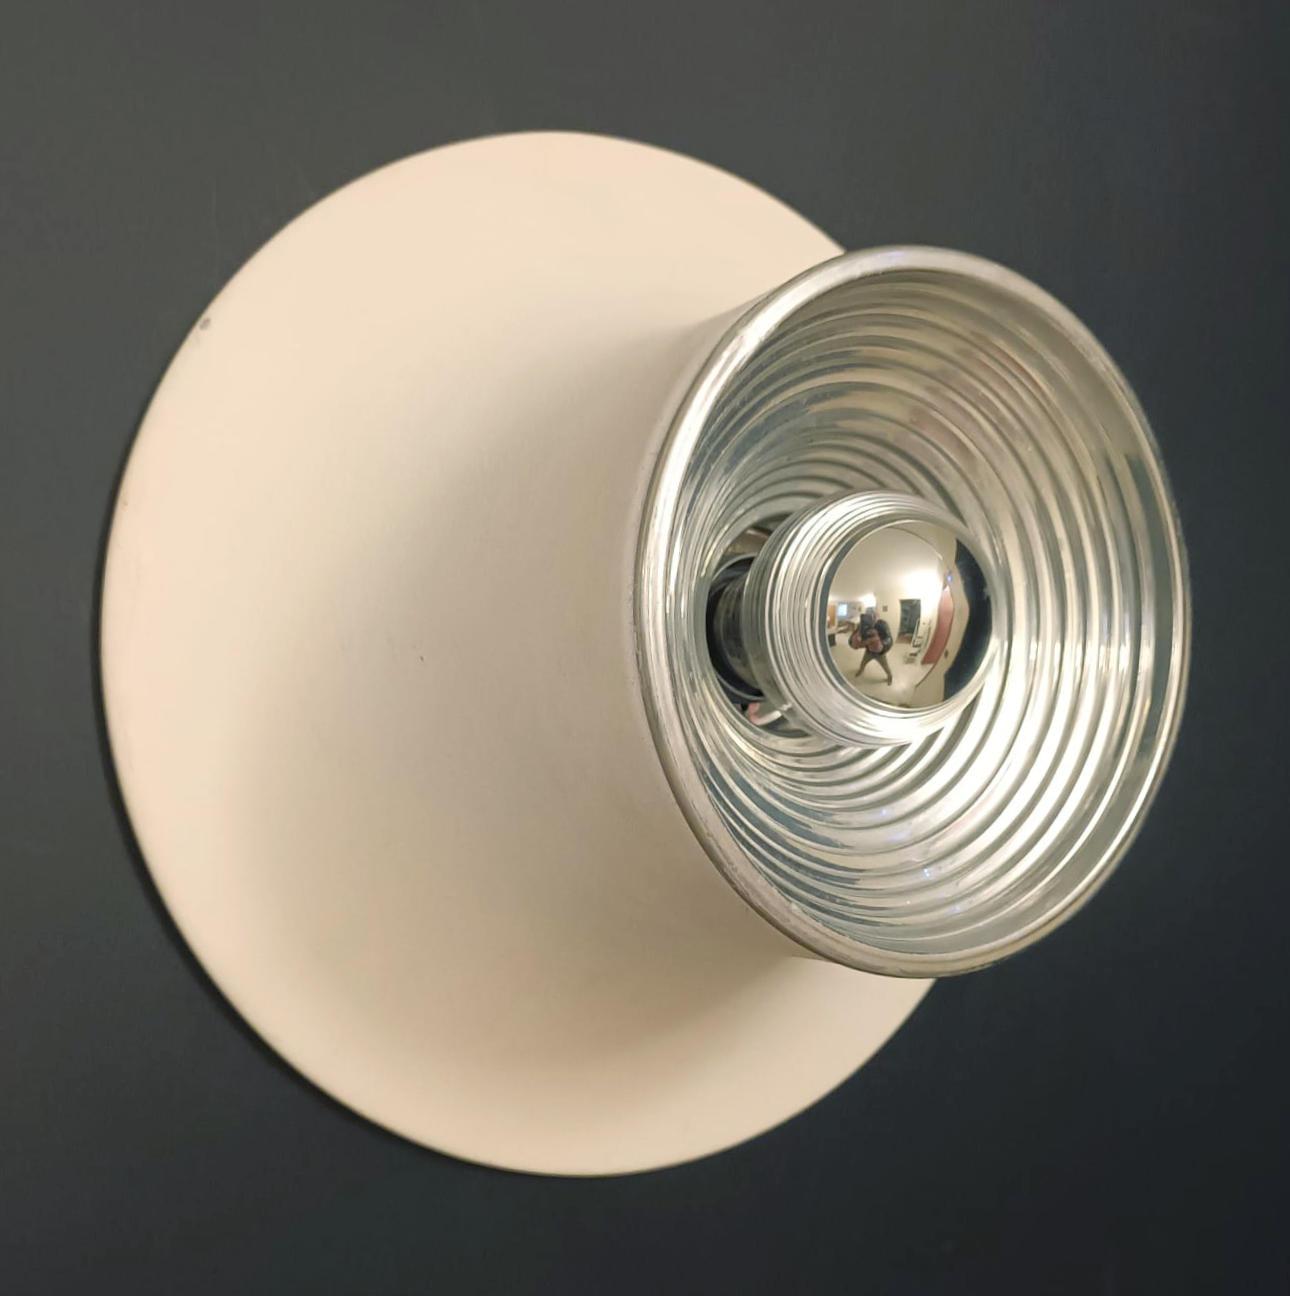 Vintage midcentury Italian wall lights or flush mounts with cream white enameled aluminum shades / Made in Italy, circa 1960s
Measures: diameter 12 inches, depth 5.5 inches
1 light / E26 or E27 type / max 60W
3 pairs available in stock in Italy,